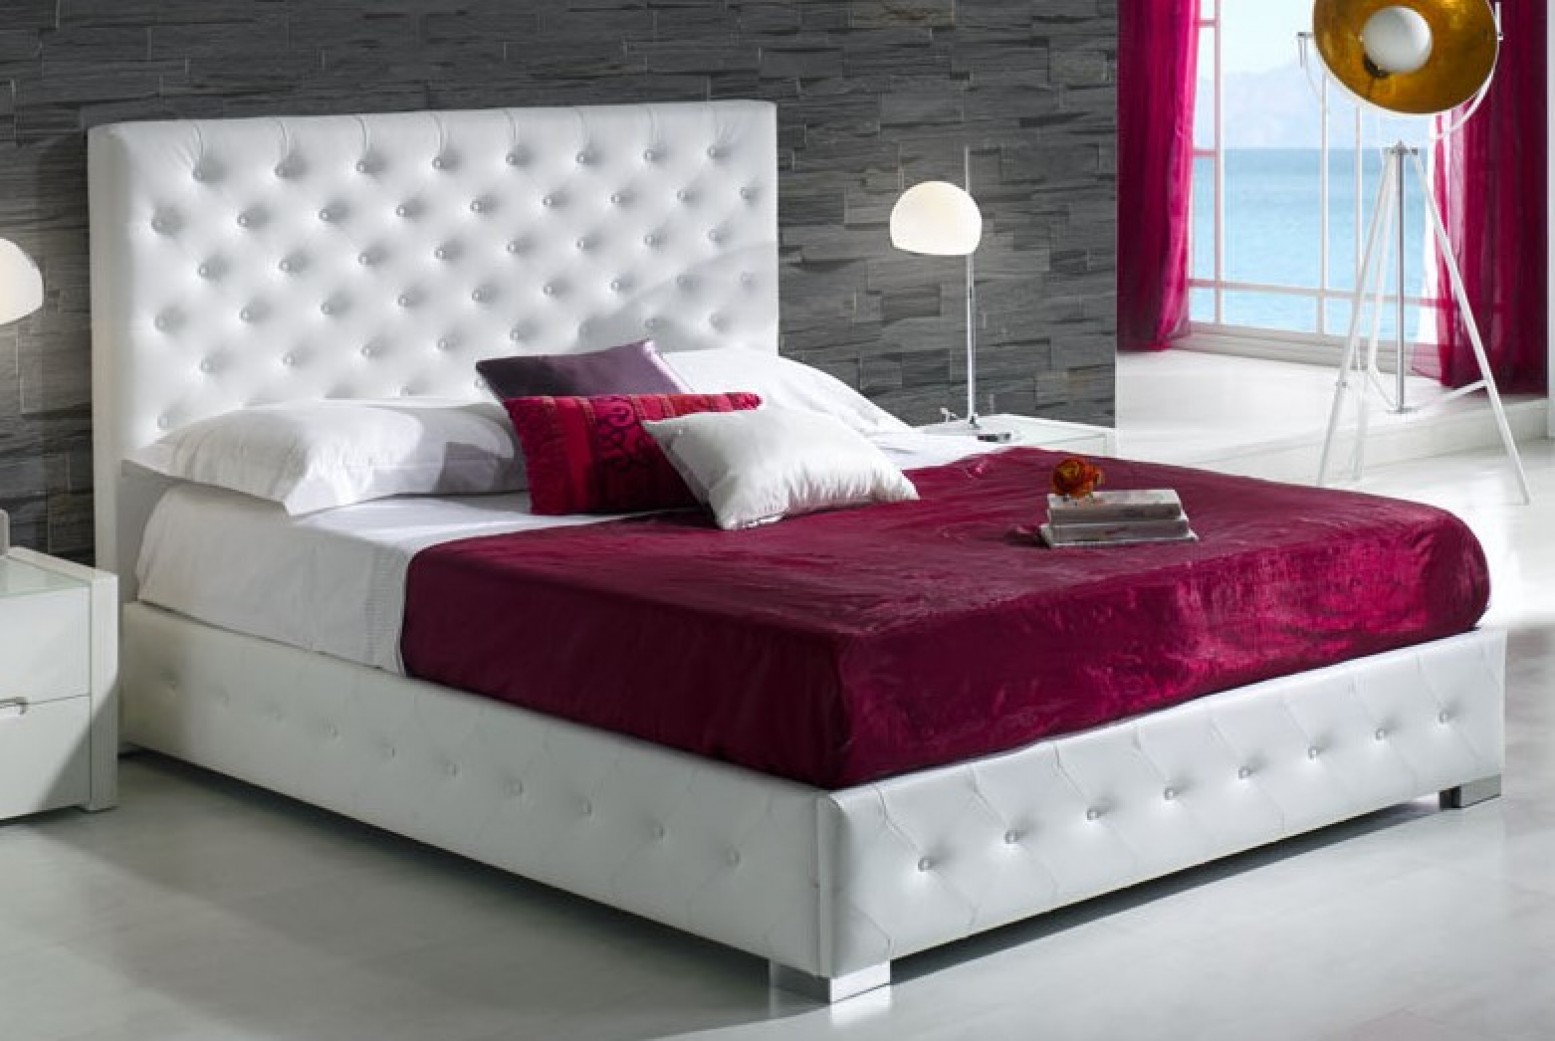 636 Alma Euro Queen Size Bed Buy Online at Best Price